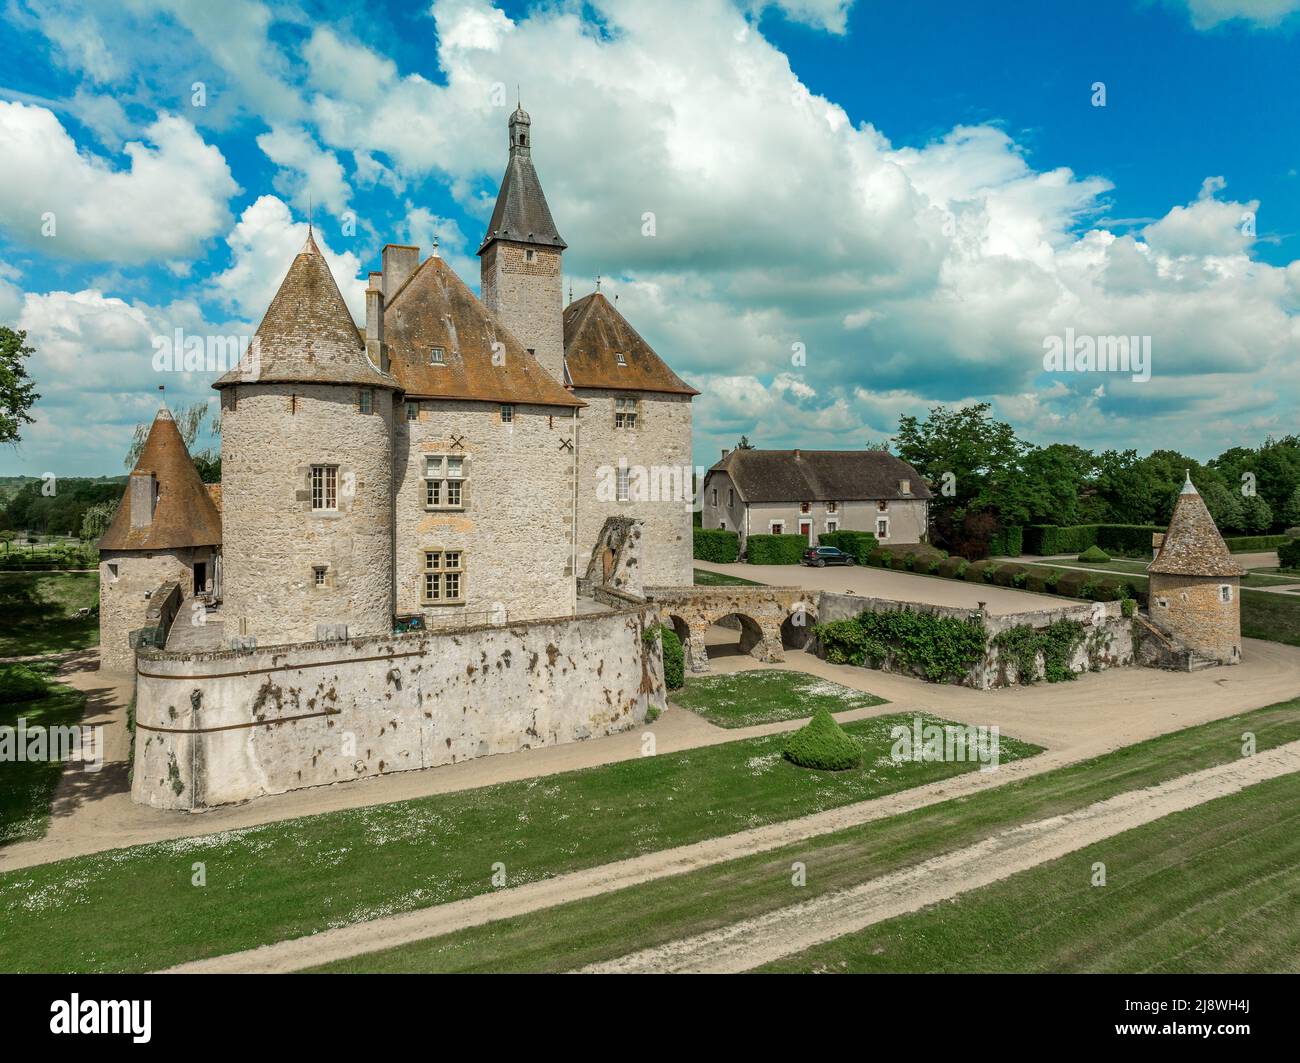 Aerial view of Chateau de Beauvoir restored medieval French castle with bridge, towers, manicured lawn and garden Stock Photo